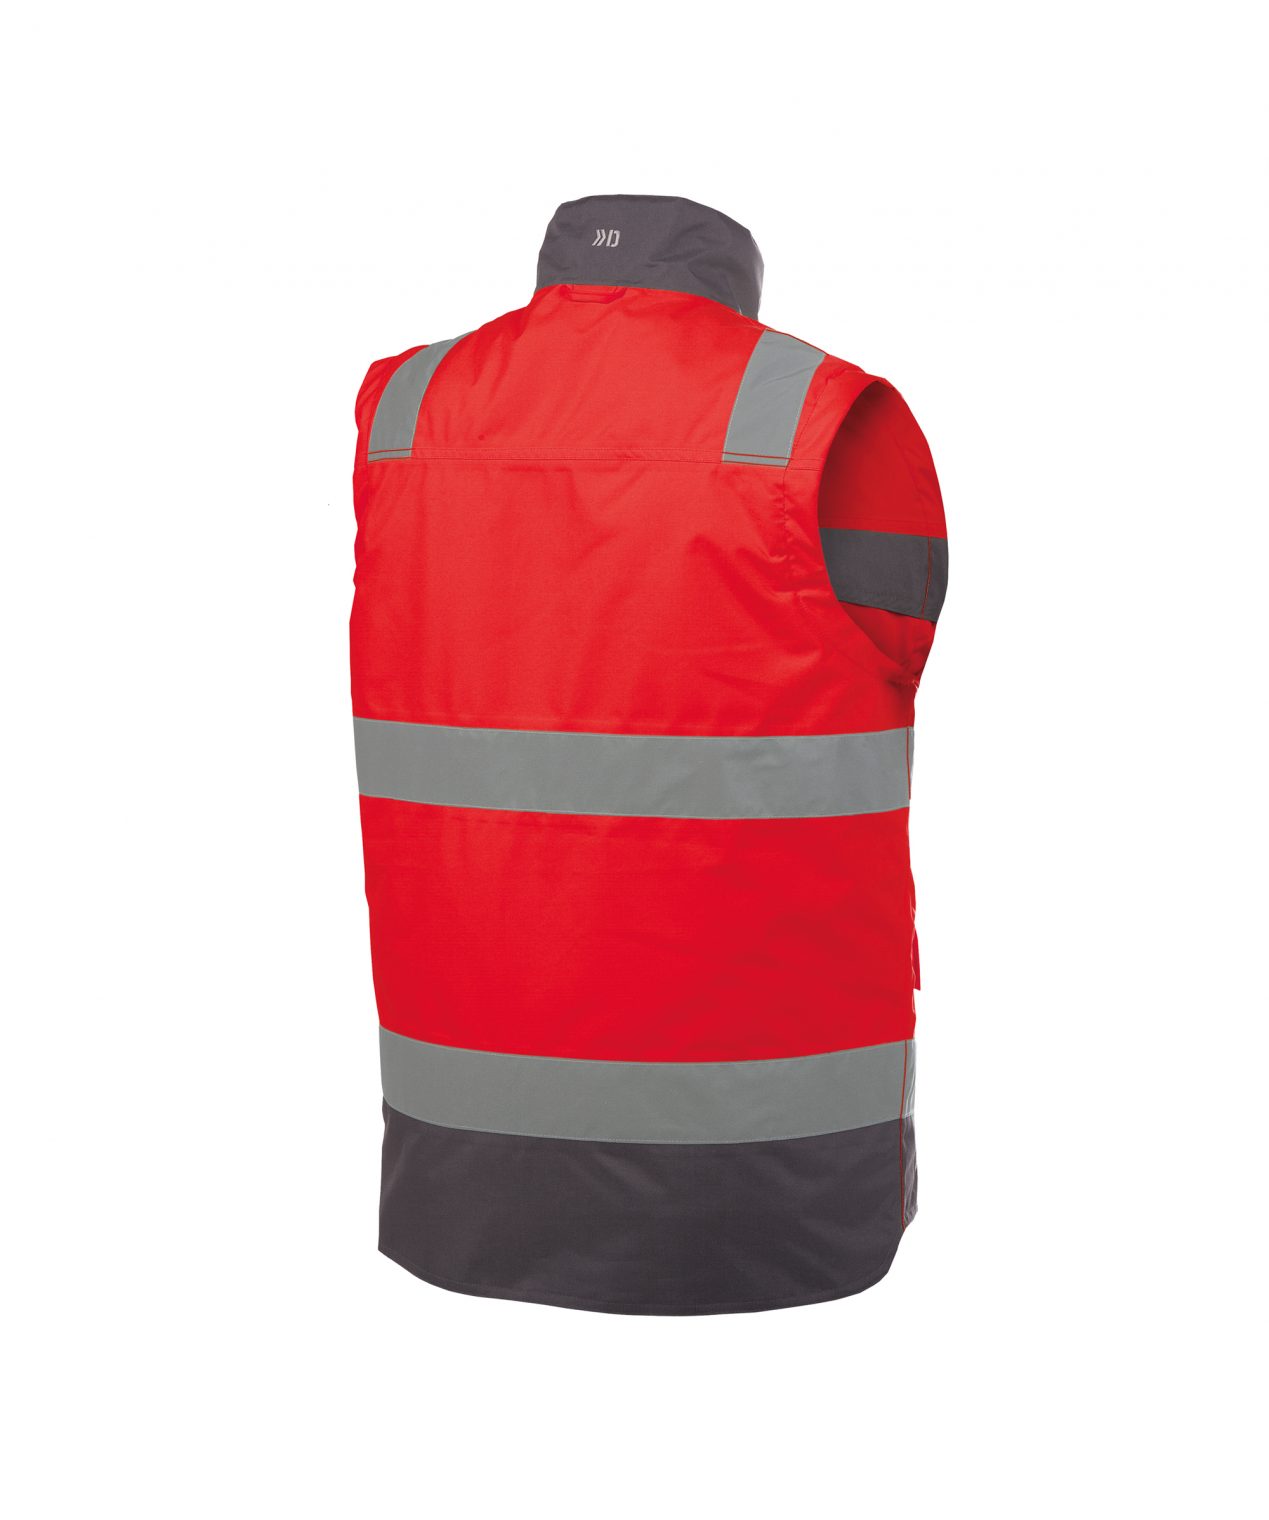 bilbao high visibility body warmer fluo red cement grey back